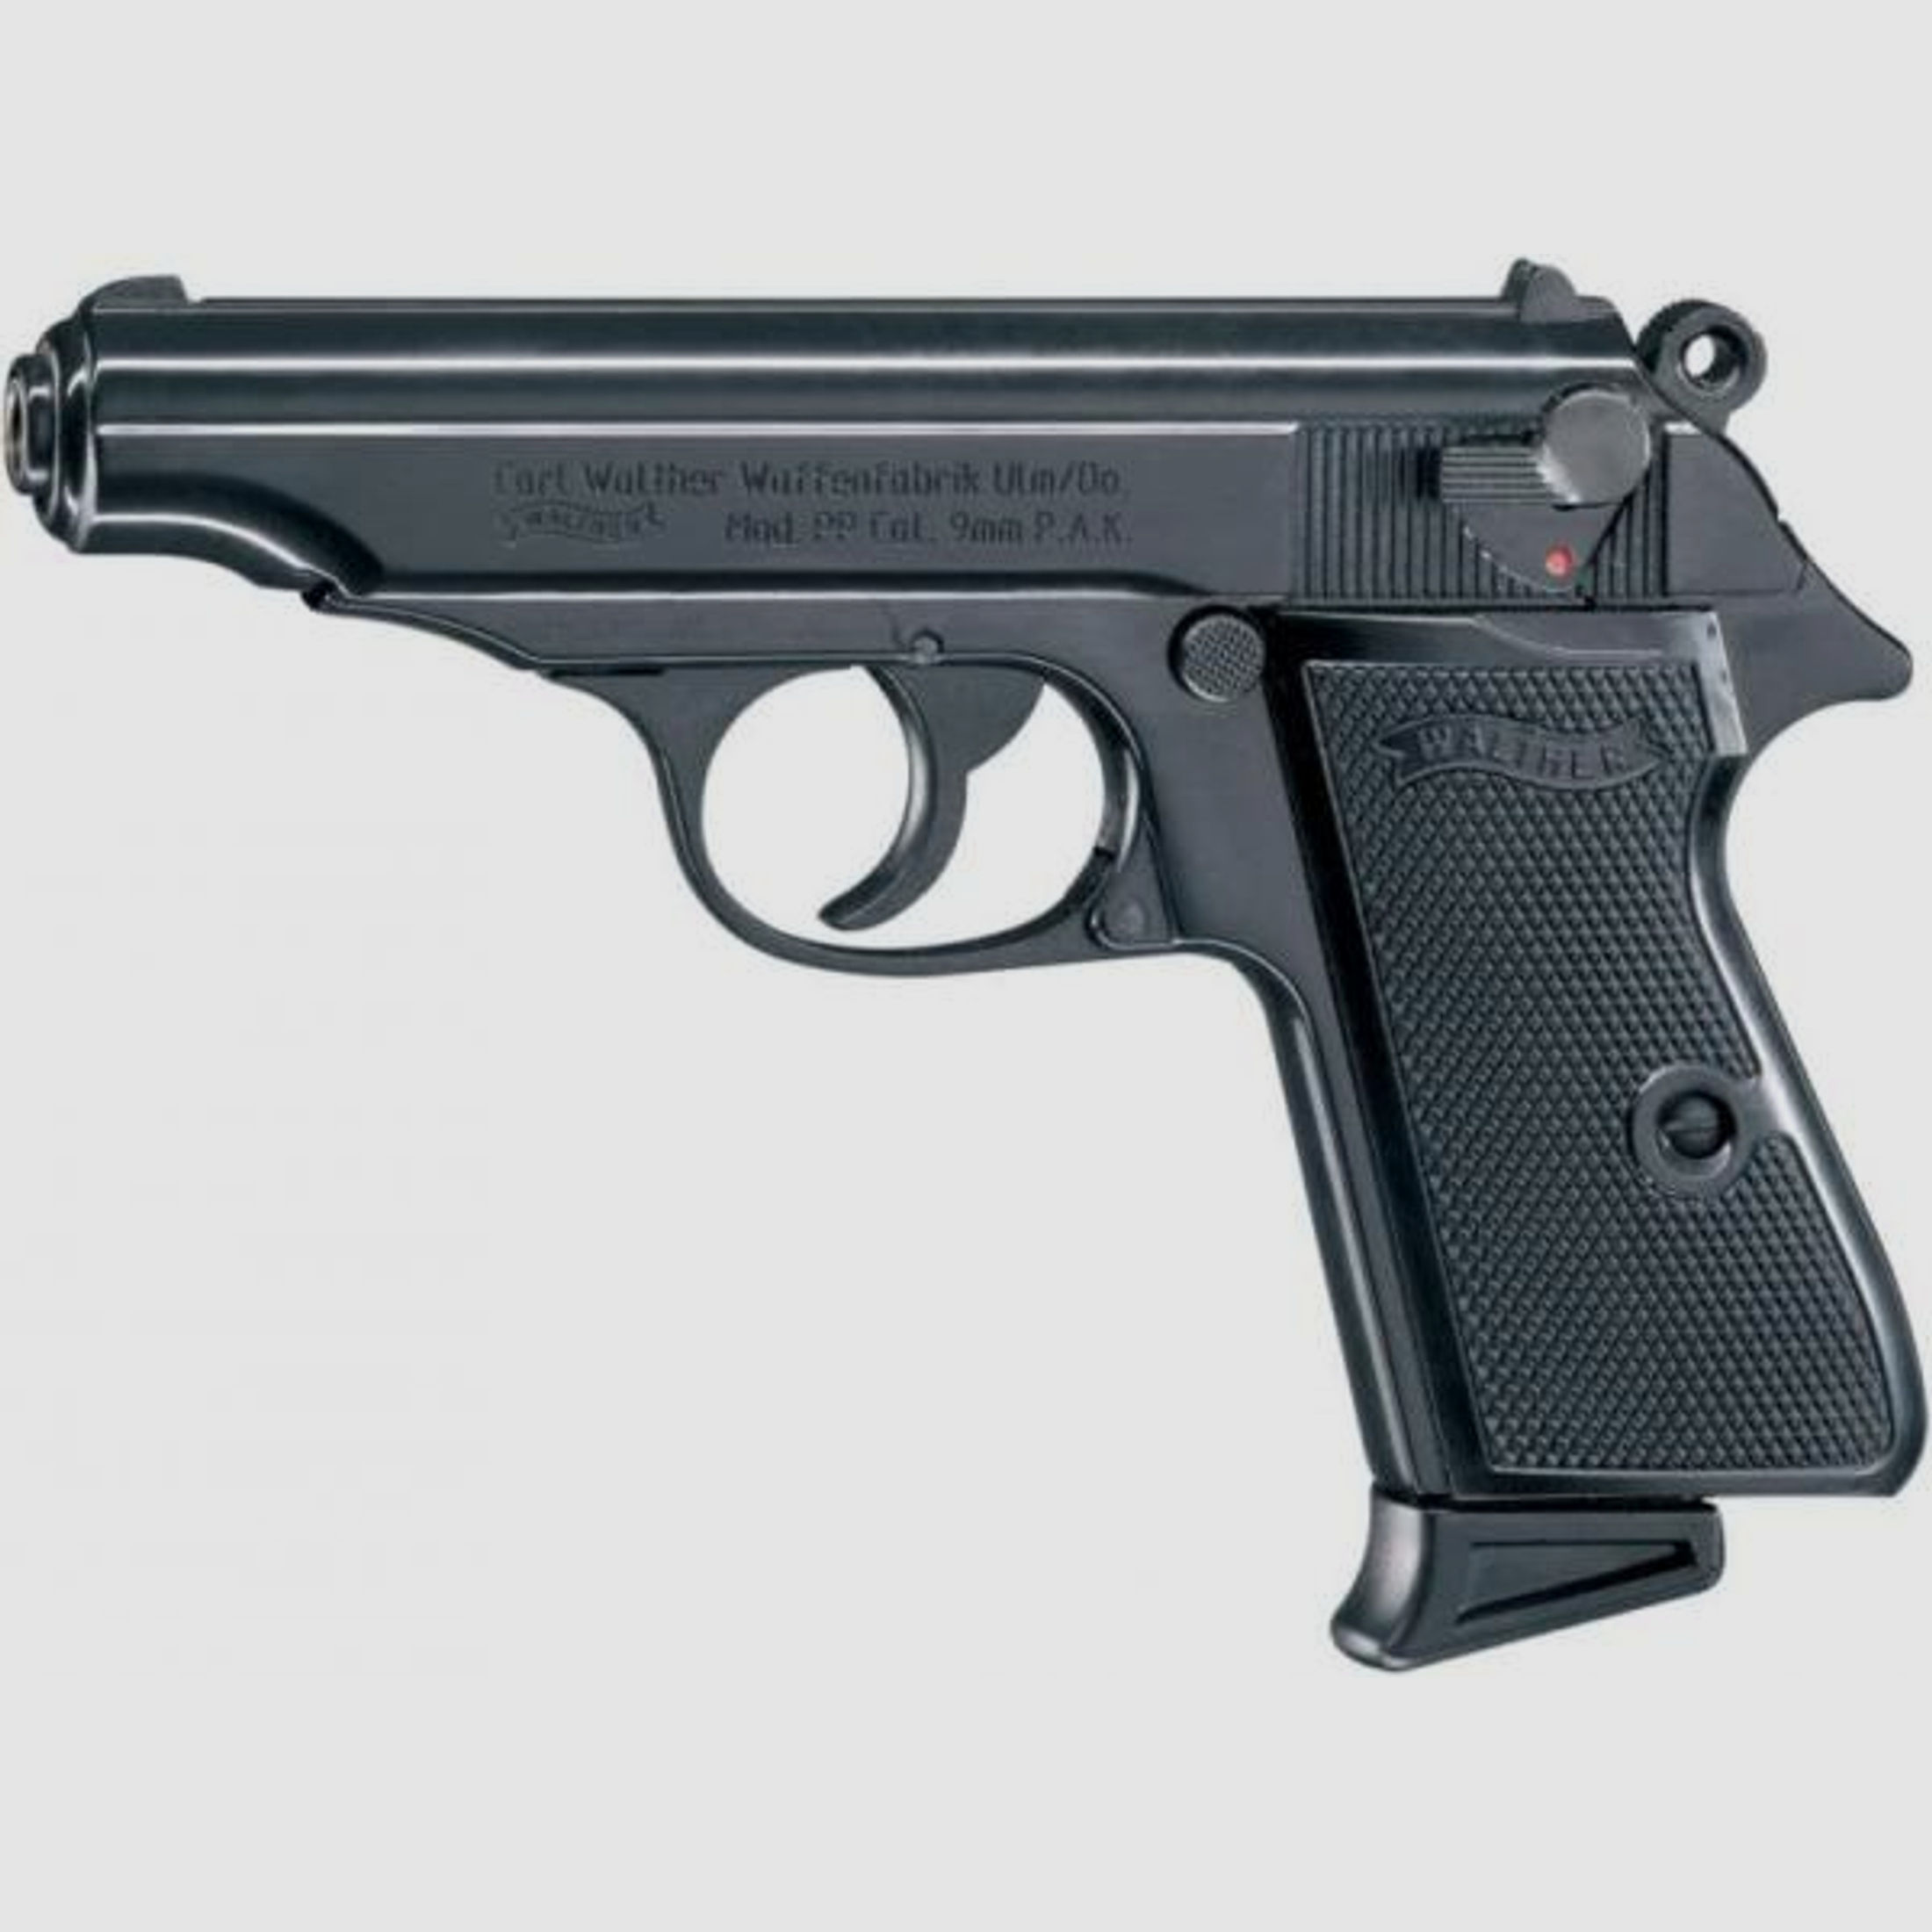 WALTHER Gaspistole (SRS) PP Kal. 9mm P.A.